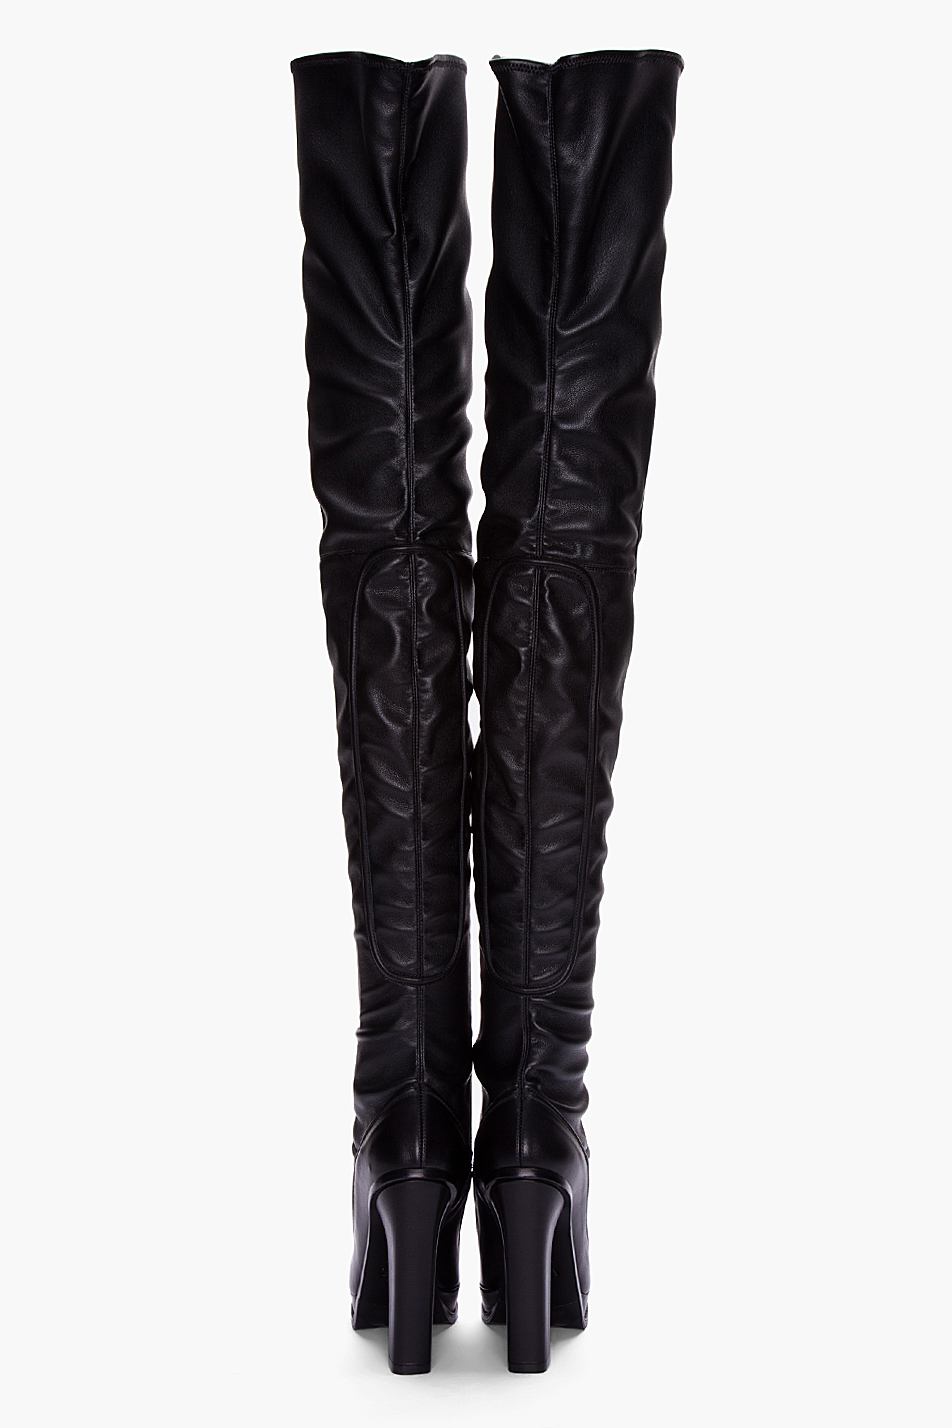 Versus Black Over The Knee Leather Nappa Boots in Black | Lyst